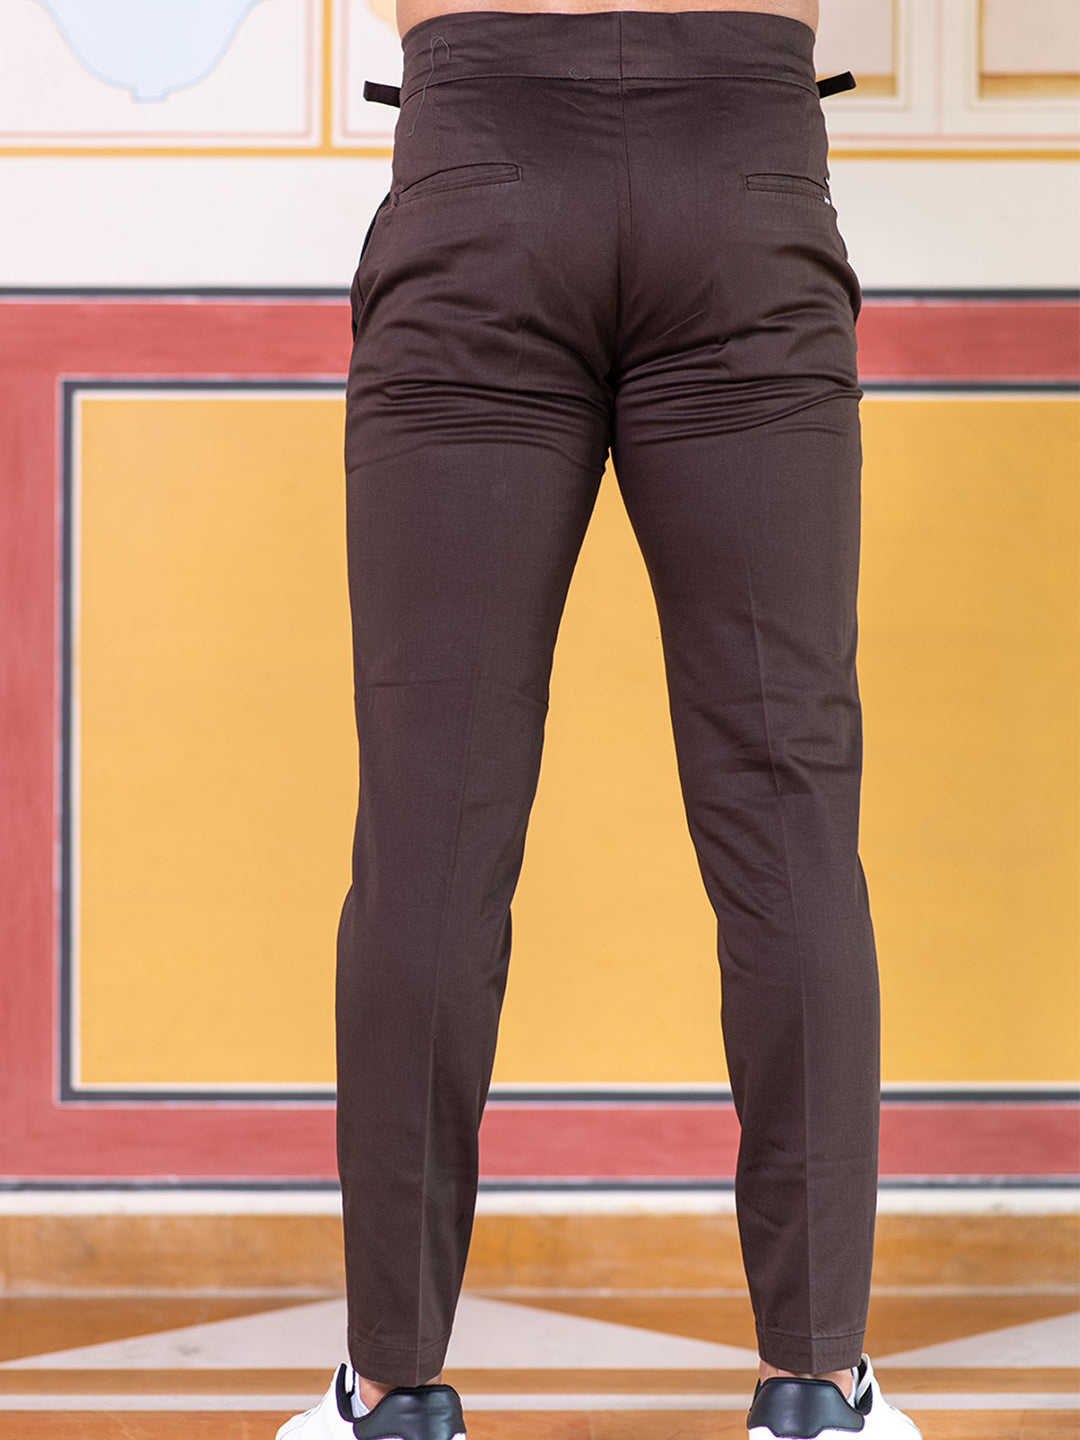 Loose Fit Tailored trousers - Black - Men | H&M